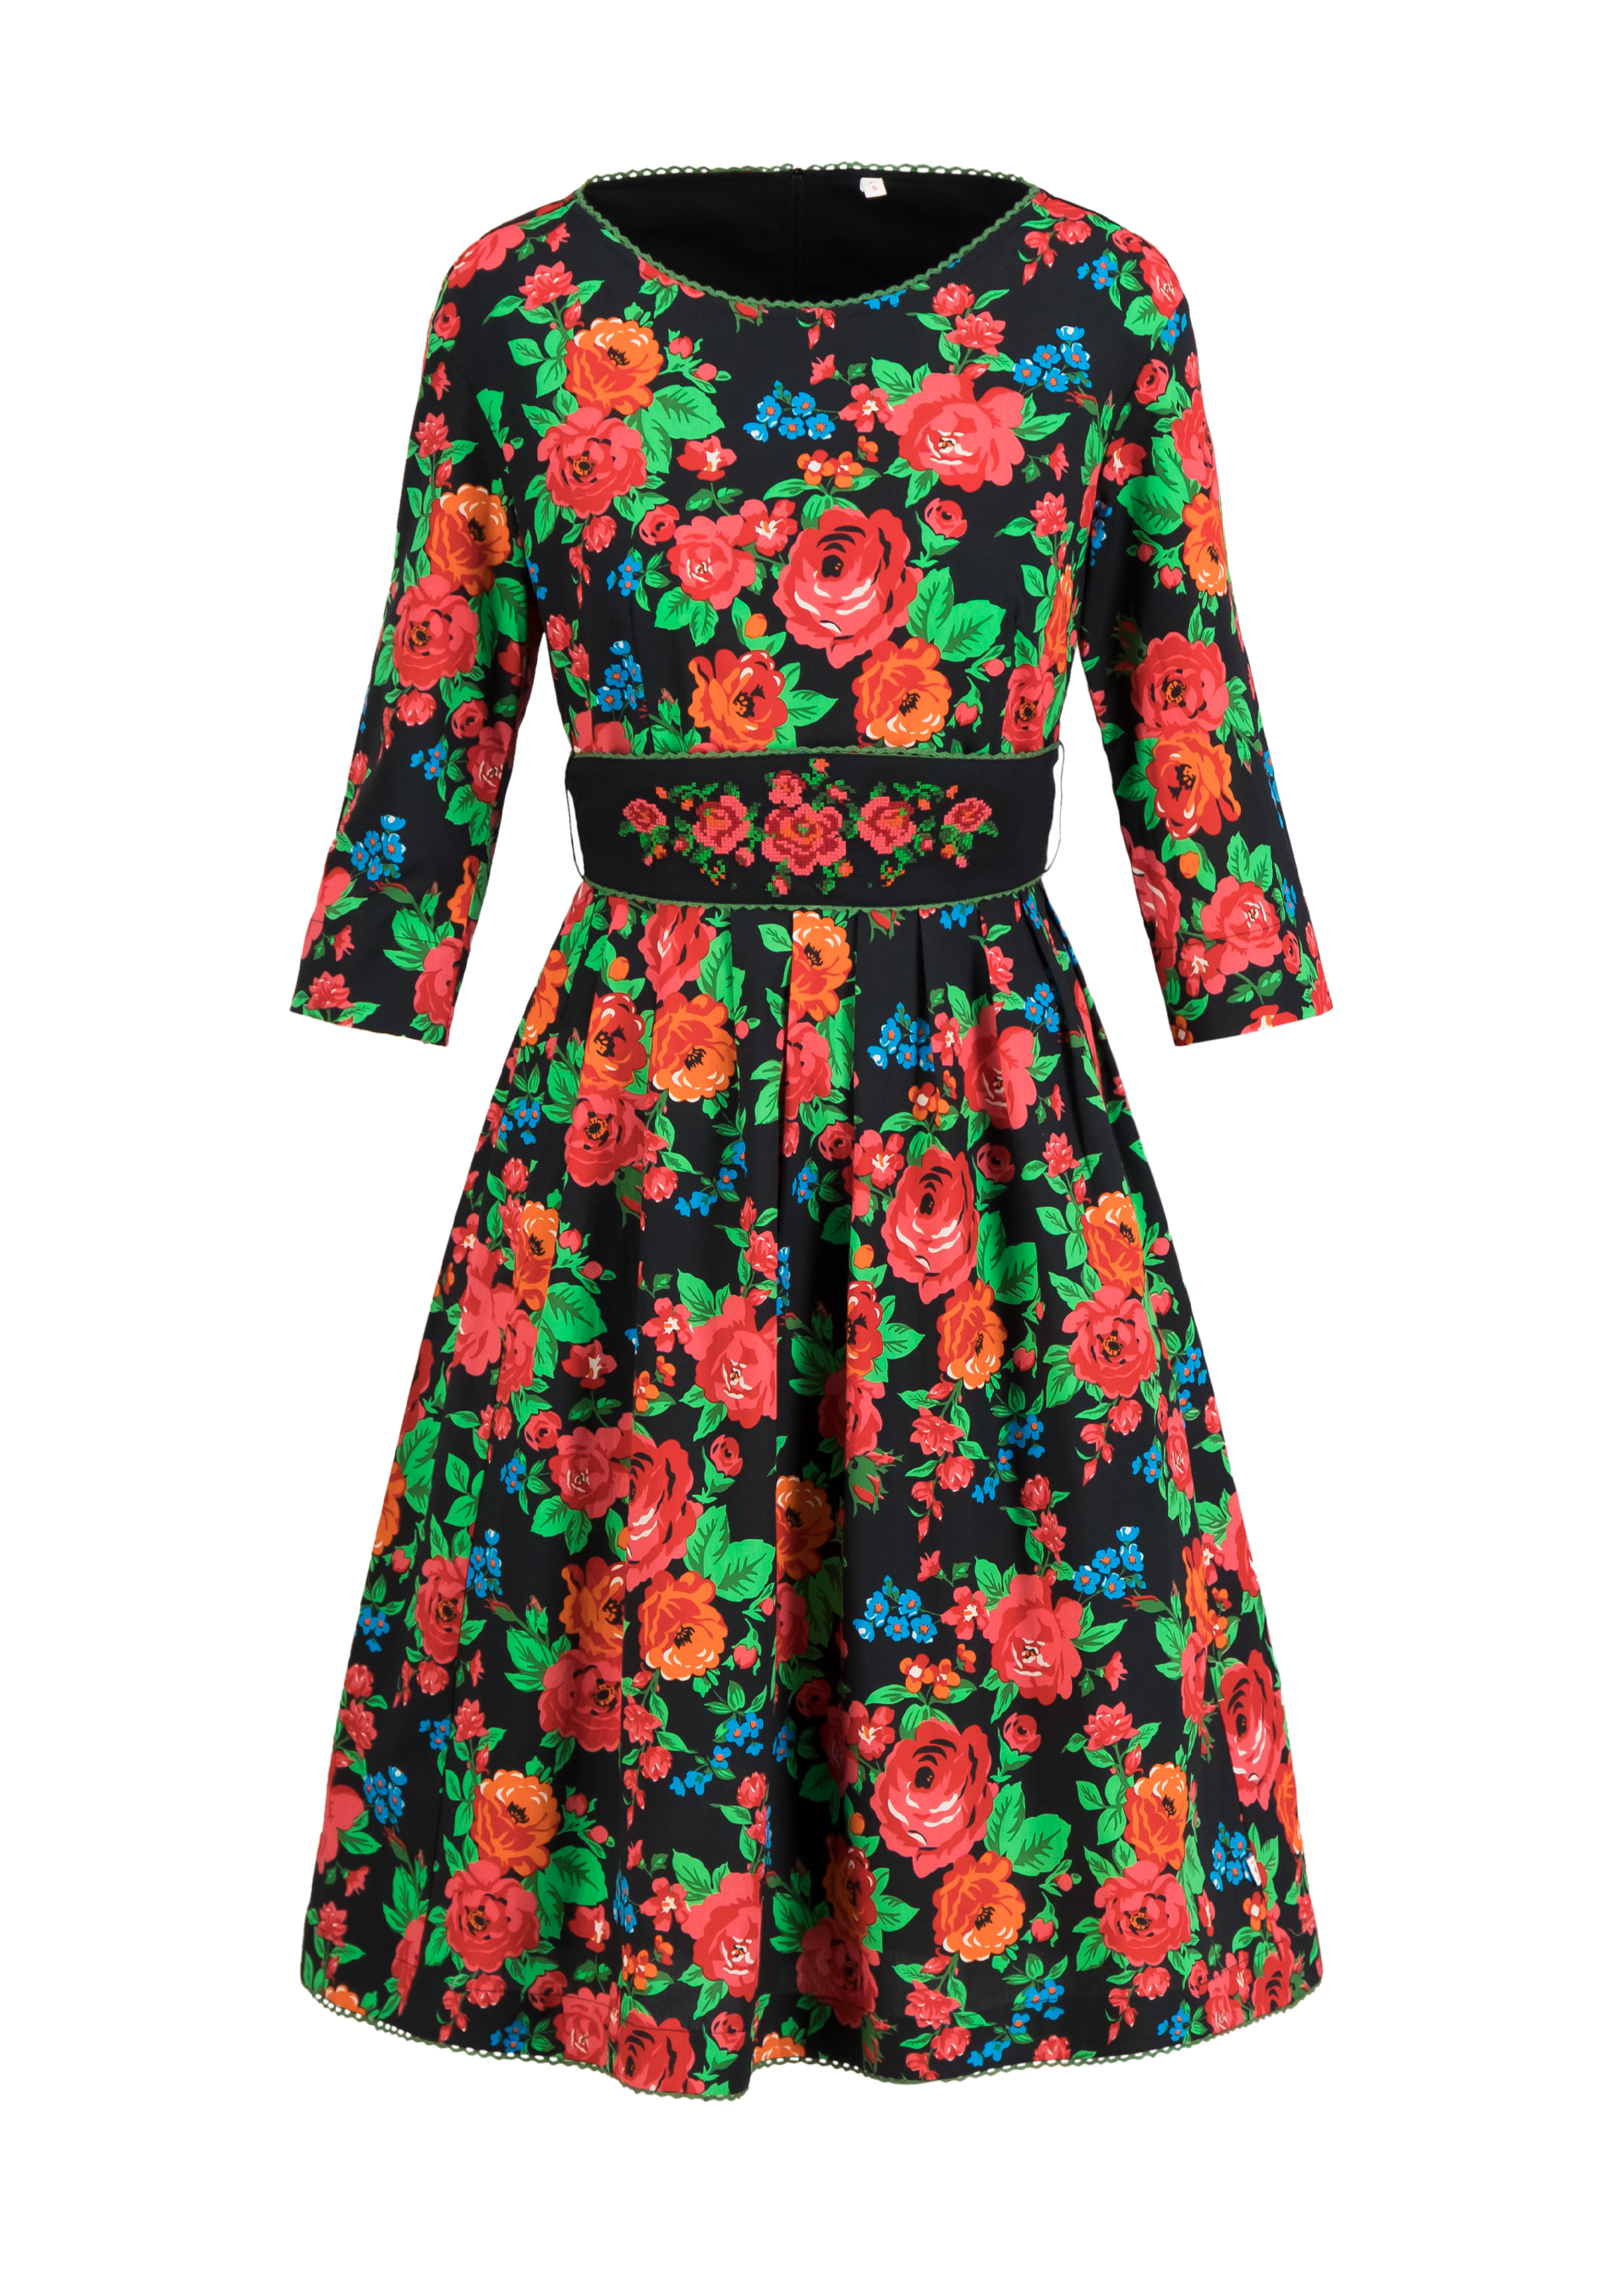 Retro Style Dress - Folks Heritage- The smell of Roses